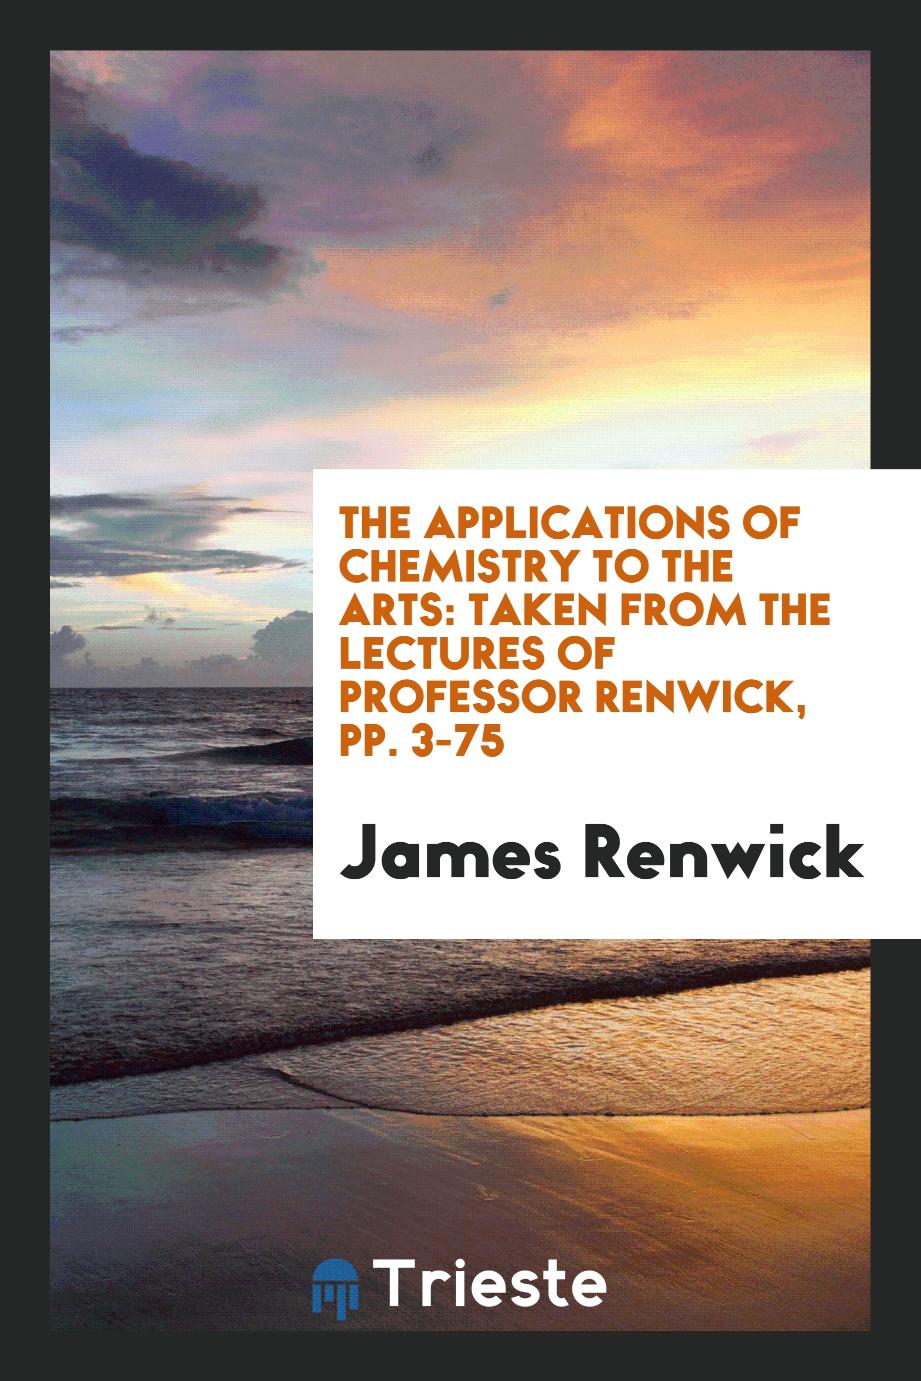 The Applications of Chemistry to the Arts: Taken from the Lectures of Professor Renwick, pp. 3-75